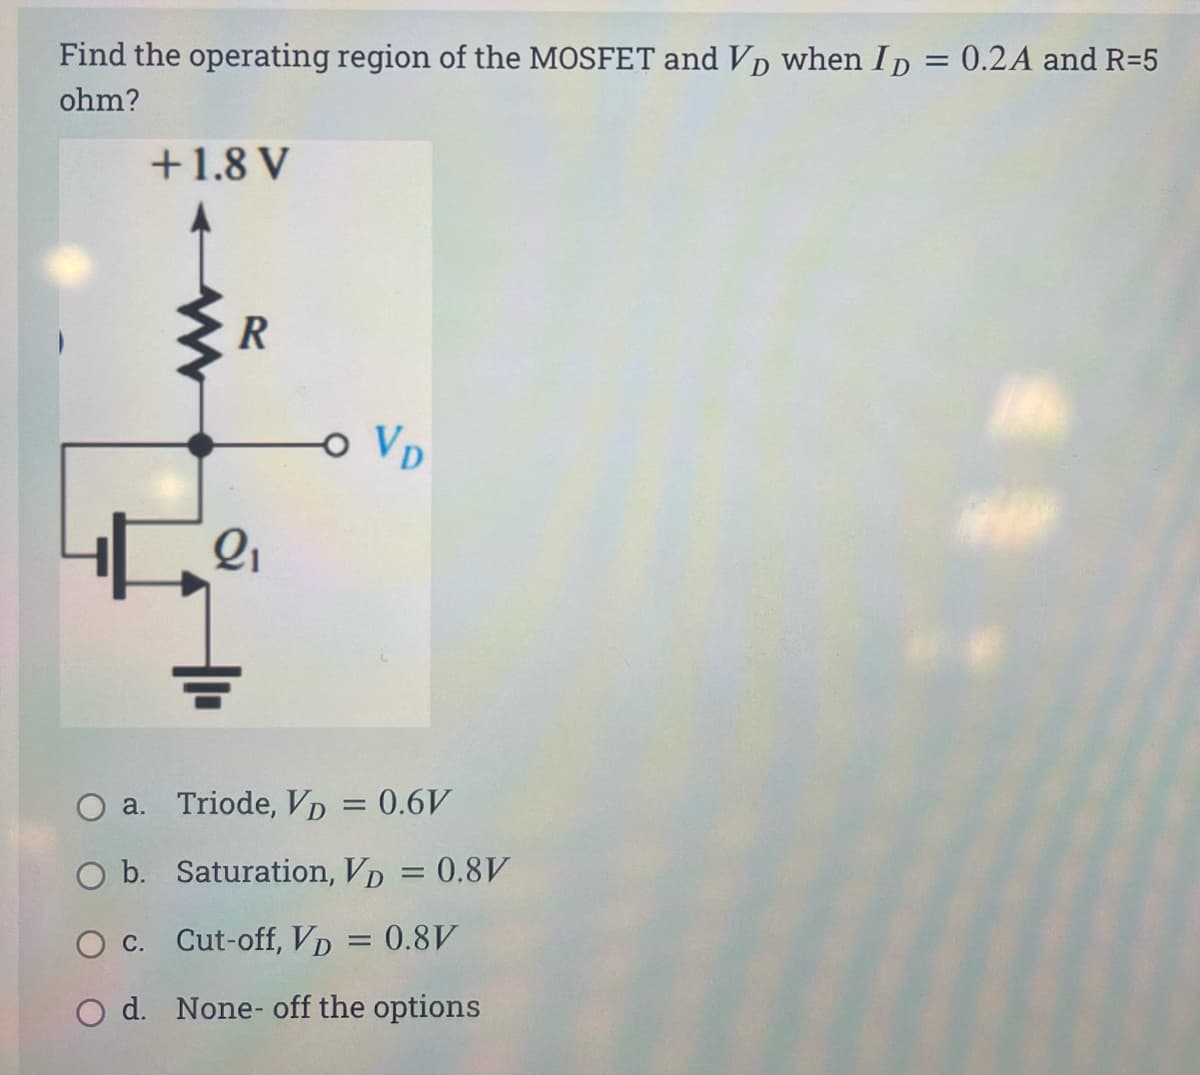 Find the operating region of the MOSFET and VD when Ip = 0.2A and R=5
ohm?
+1.8 V
R
o VD
a. Triode, VD = 0.6V
O b. Saturation, VD = 0.8V
O c. Cut-off, VD = 0.8V
O d. None- off the options
